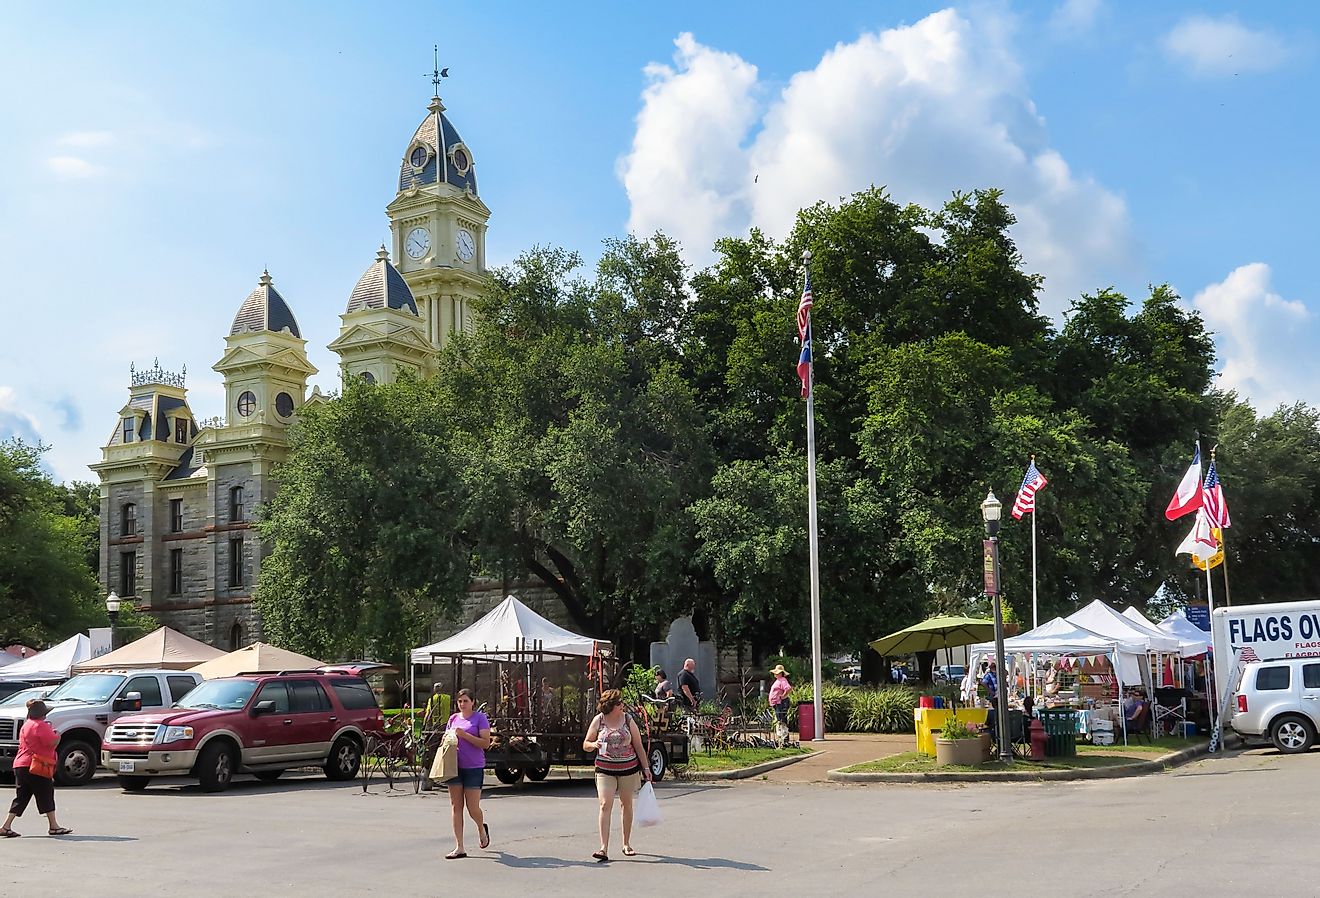 Market days surrounds the central square and Goliad County Courthouse, Texas. Image credit Philip Arno Photography via Shutterstock